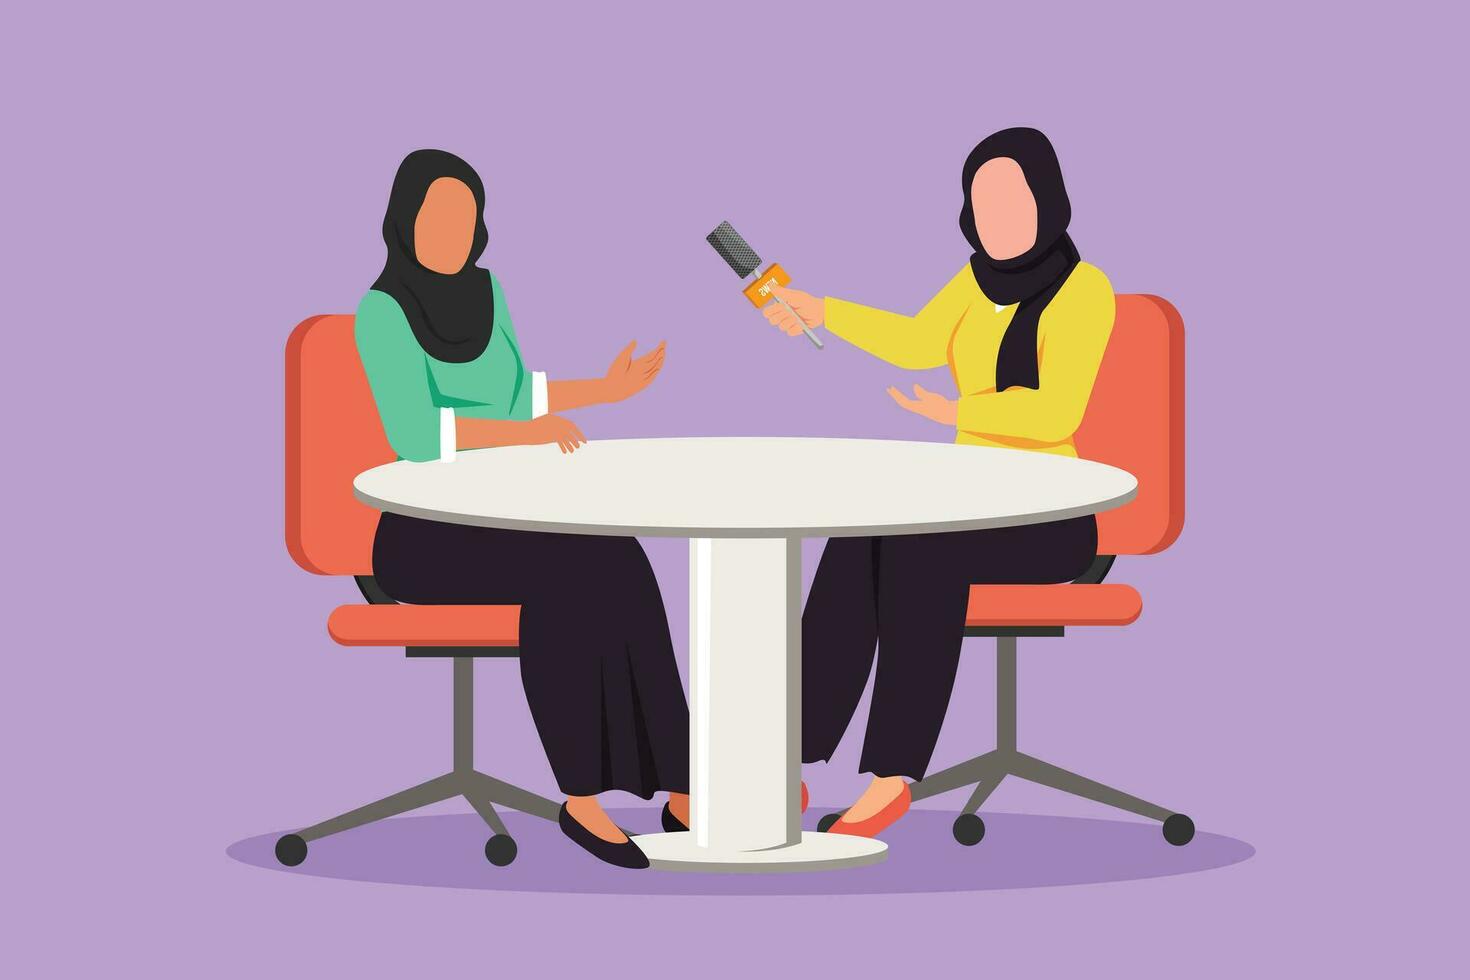 Cartoon flat style drawing talk show program at studio with interviewing, discussing host. People recording tv program, Arab woman journalist questioning guest star. Graphic design vector illustration